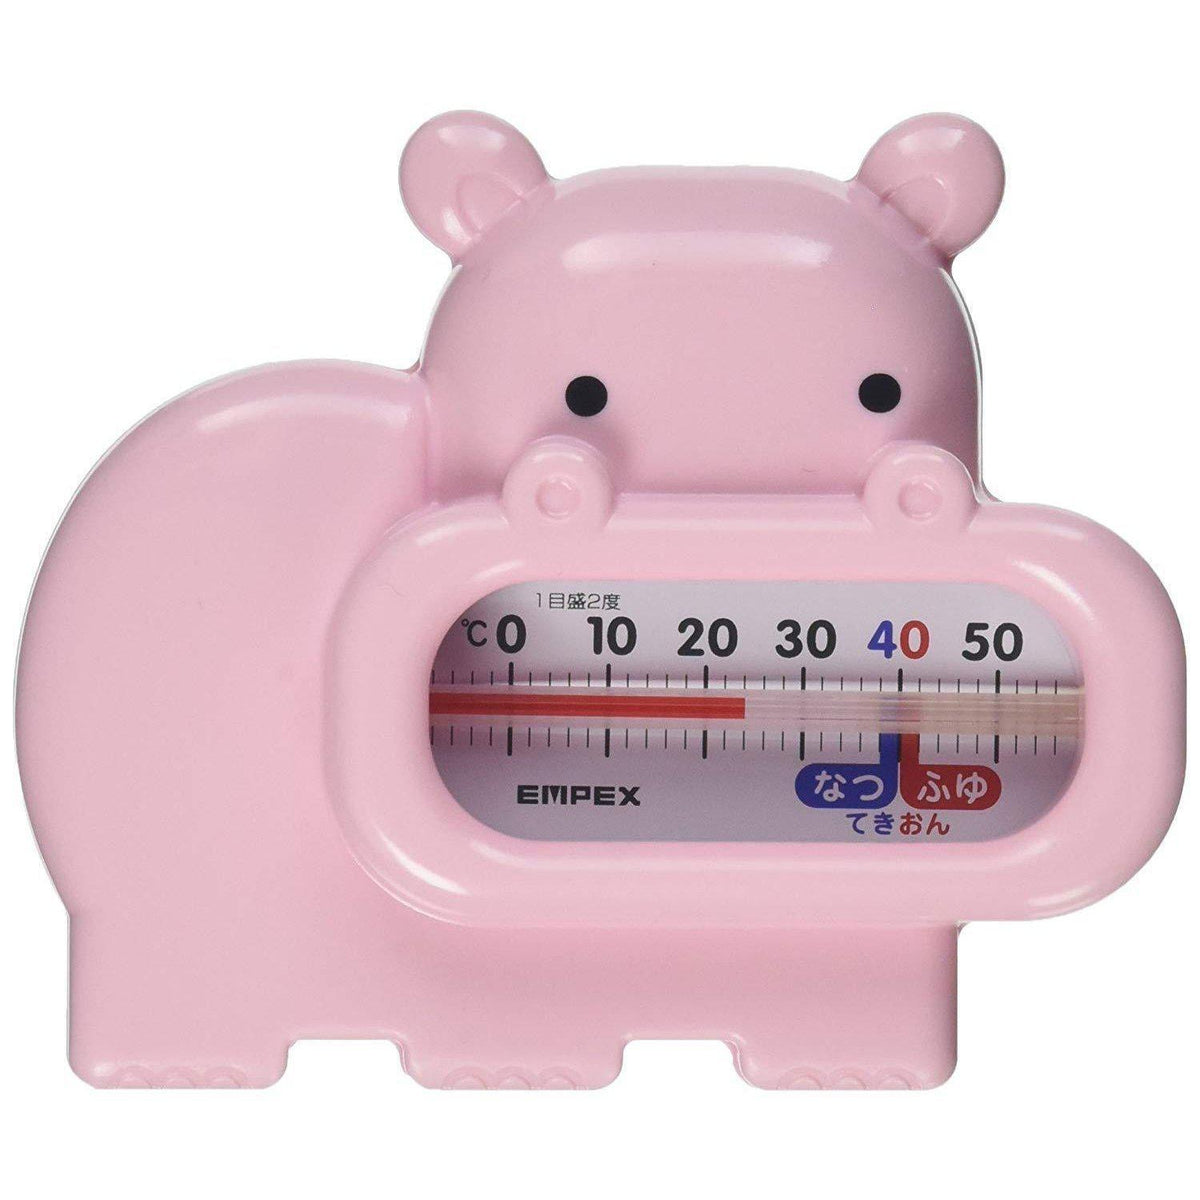 http://japanesetaste.com/cdn/shop/products/Empex-Floating-Hippopotamus-Toy-and-Baby-Bath-Thermometer-TG-5133-Japanese-Taste.jpg?crop=center&height=1200&v=1677547476&width=1200